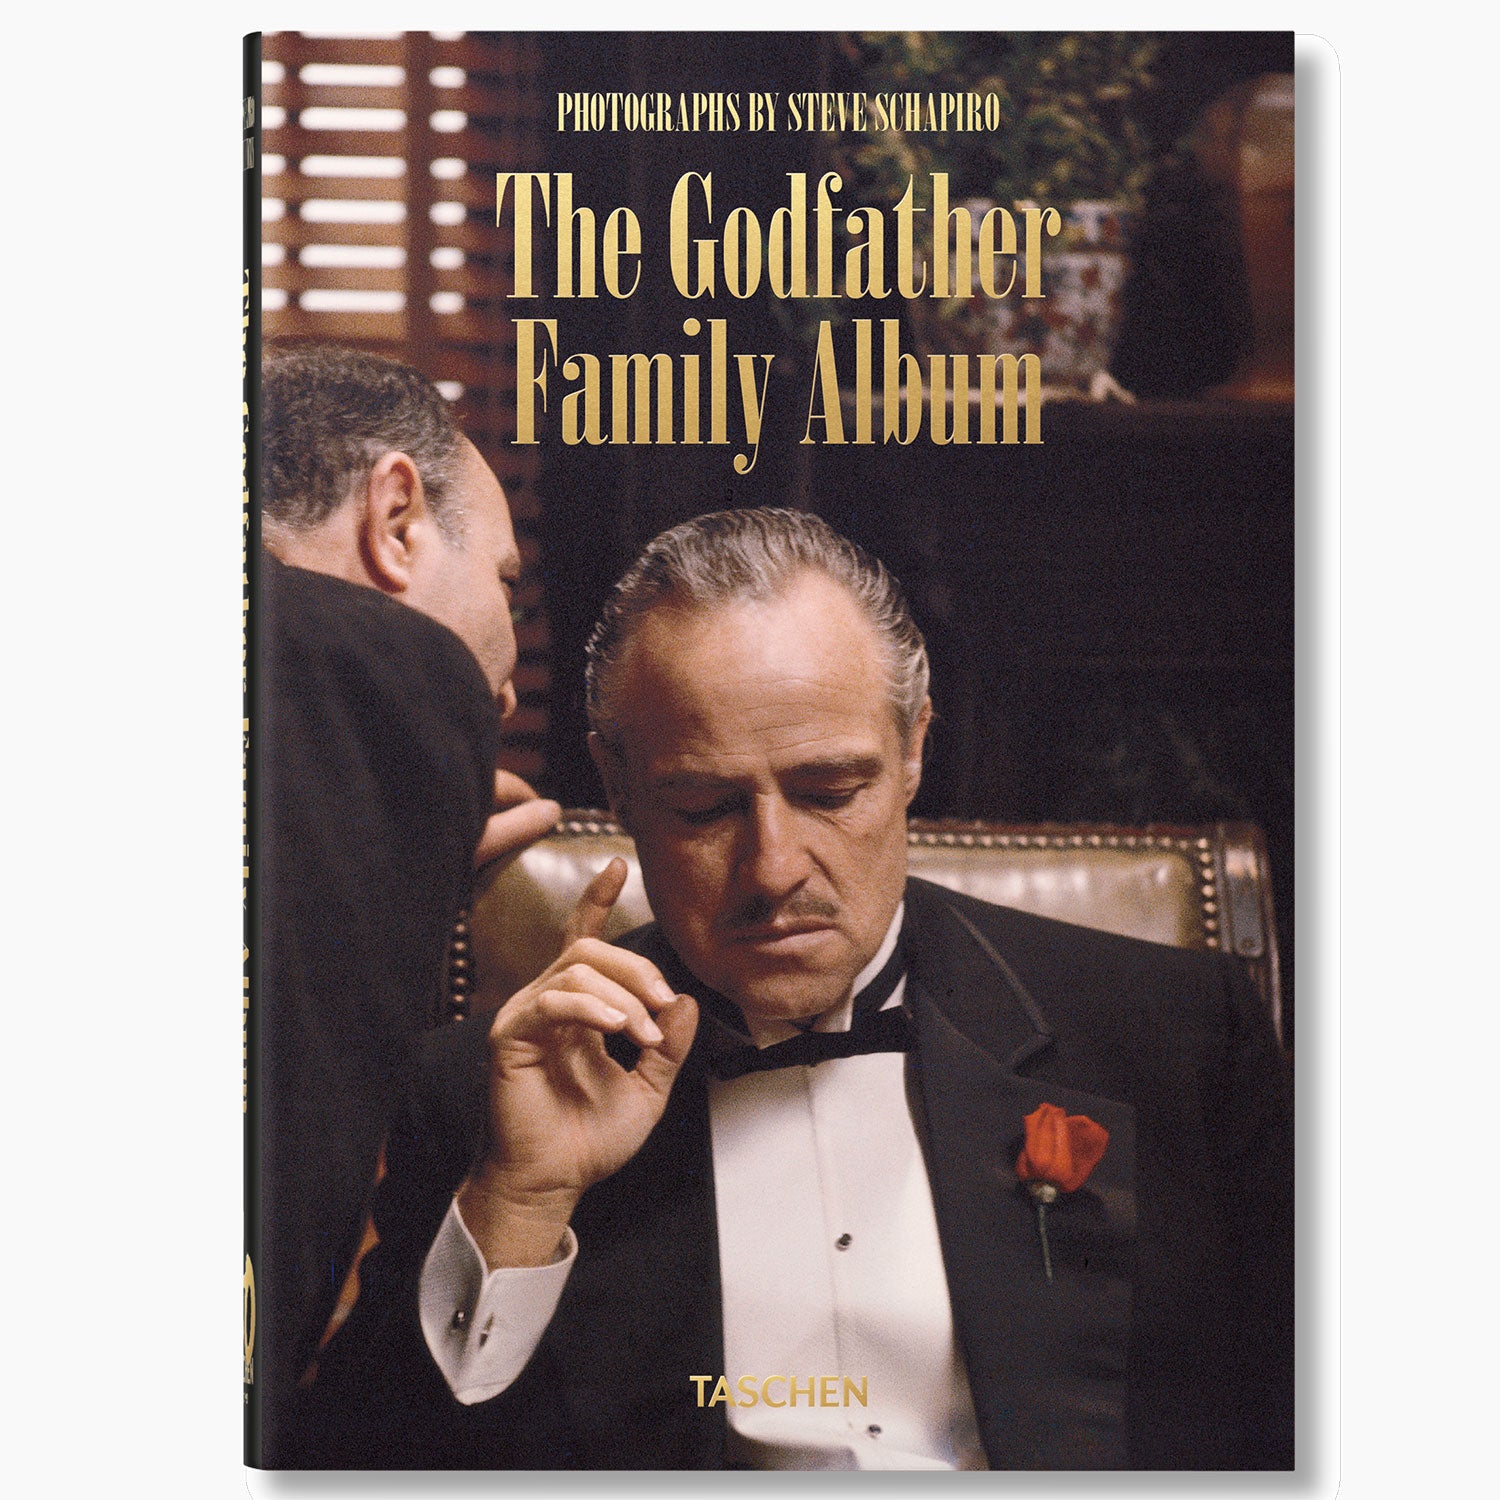 The Godfather Family Album. 40th Anniversary Edition